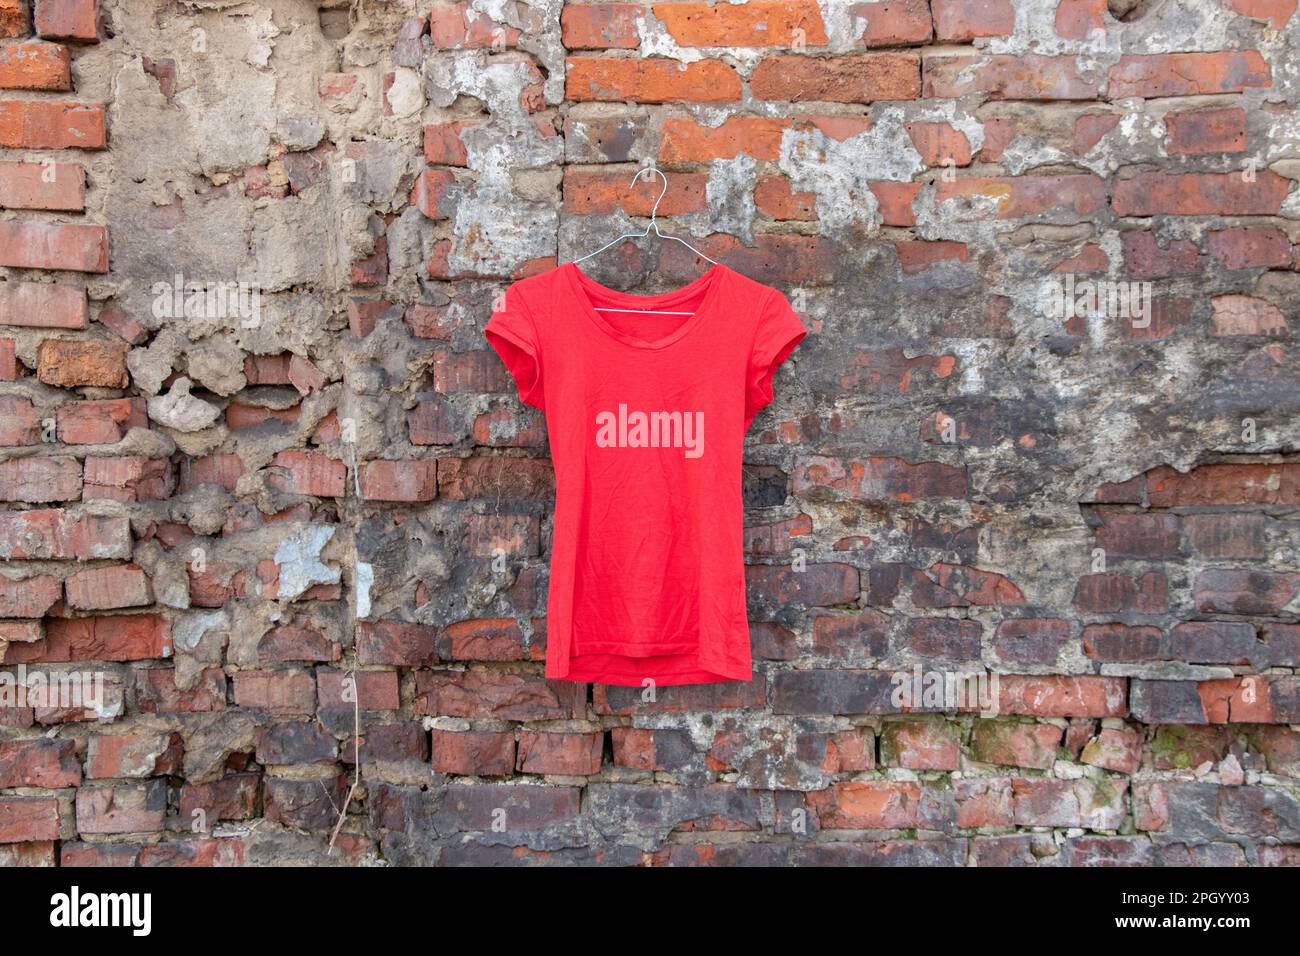 red t-shirt hanging on a hanger on a brick wall in the street, fashion womens clothing Stock Photo